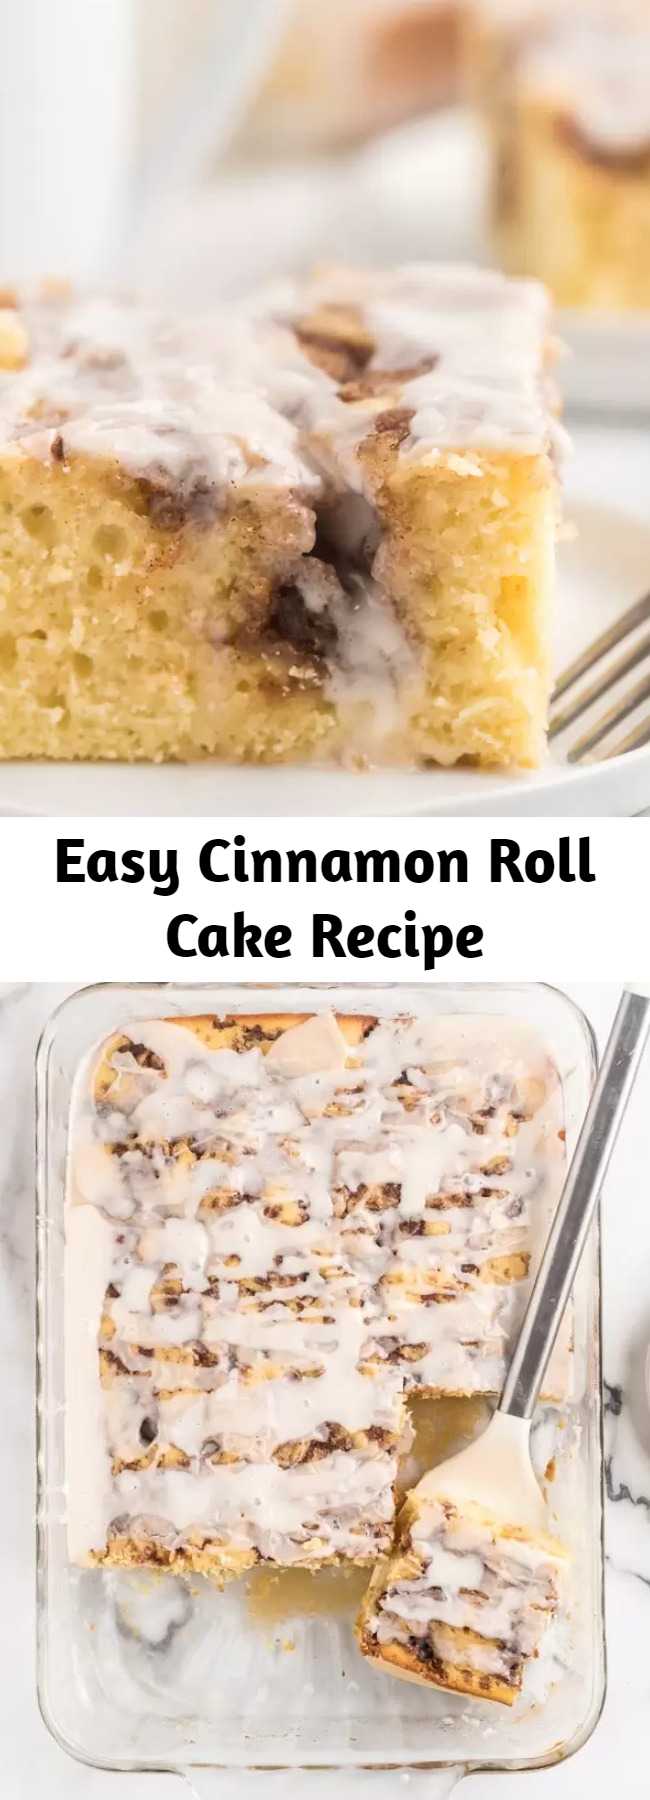 Easy Cinnamon Roll Cake Recipe - Here is a fun twist on a coffee cake recipe. This easy cinnamon roll cake recipe is the best. Get the taste of homemade cinnamon rolls without all the work. #cake #recipes #breakfastrecipes #easyrecipes